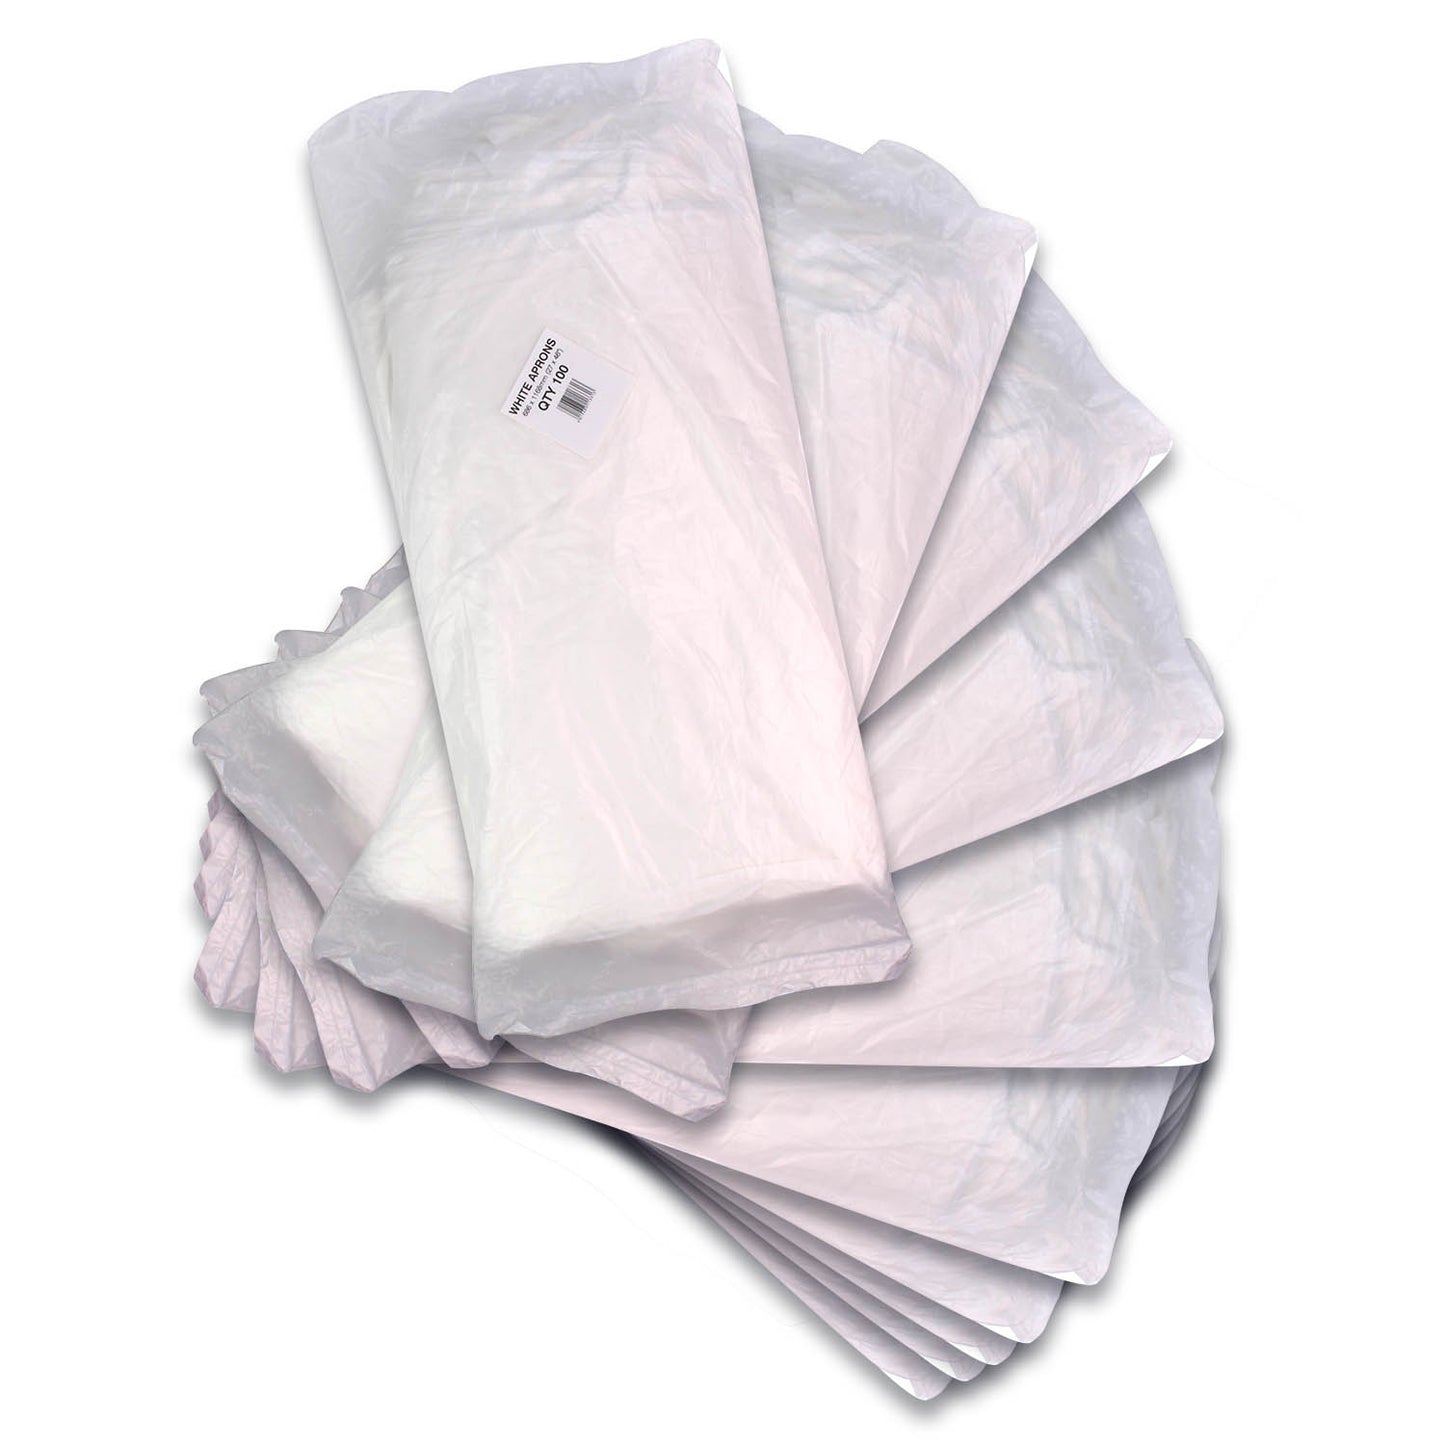 1 x Pack of 100 White Aprons (16 Micron, NHS Spec, Flat Pack)